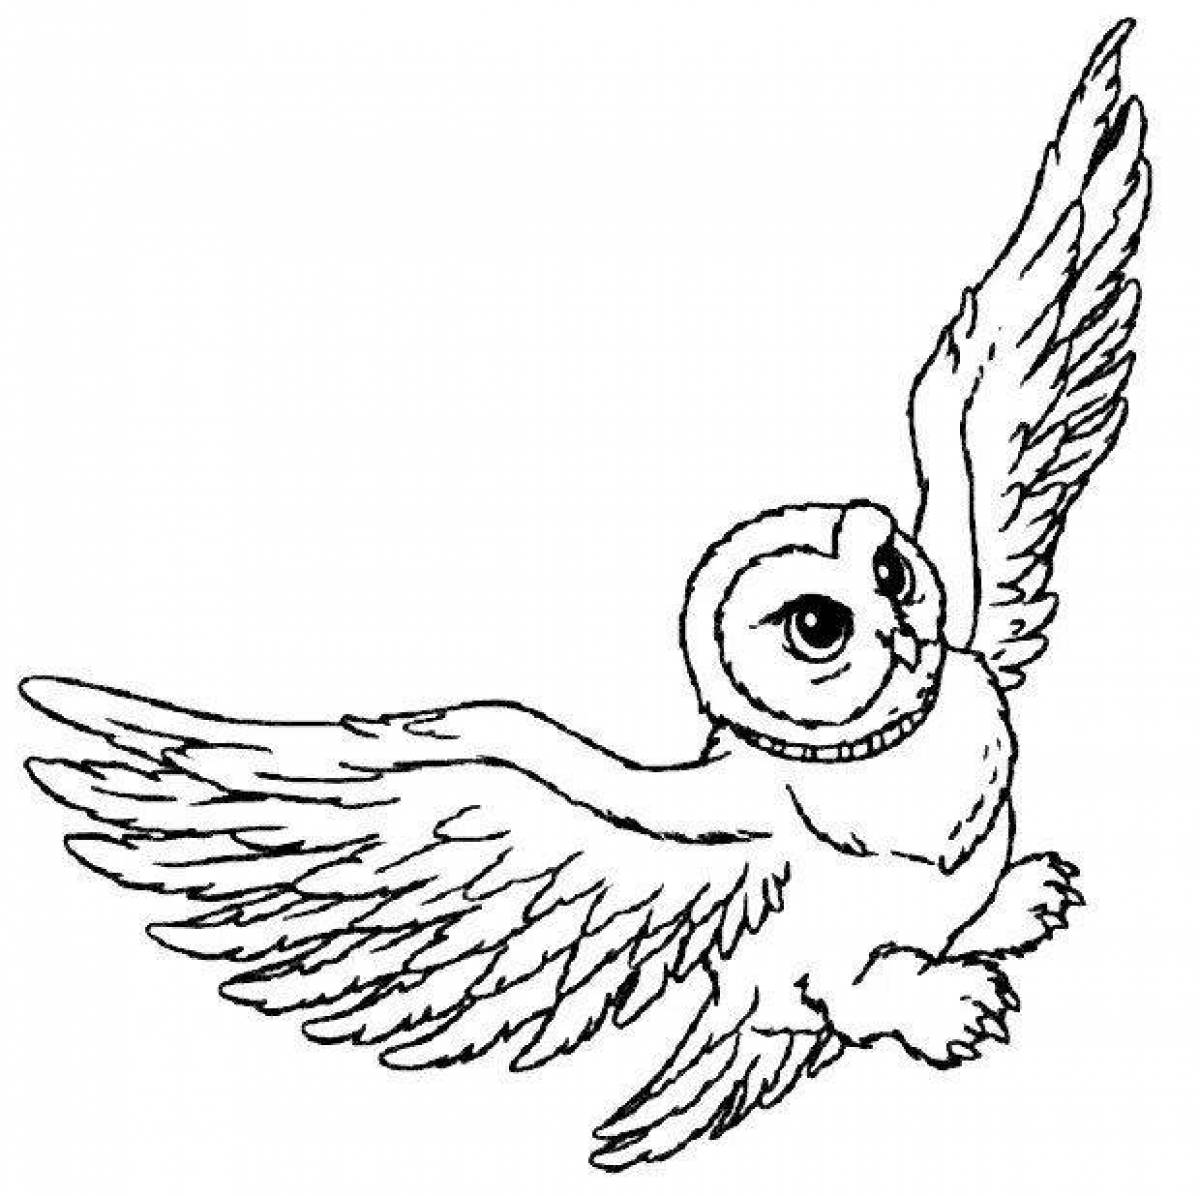 Great harry potter owl coloring book